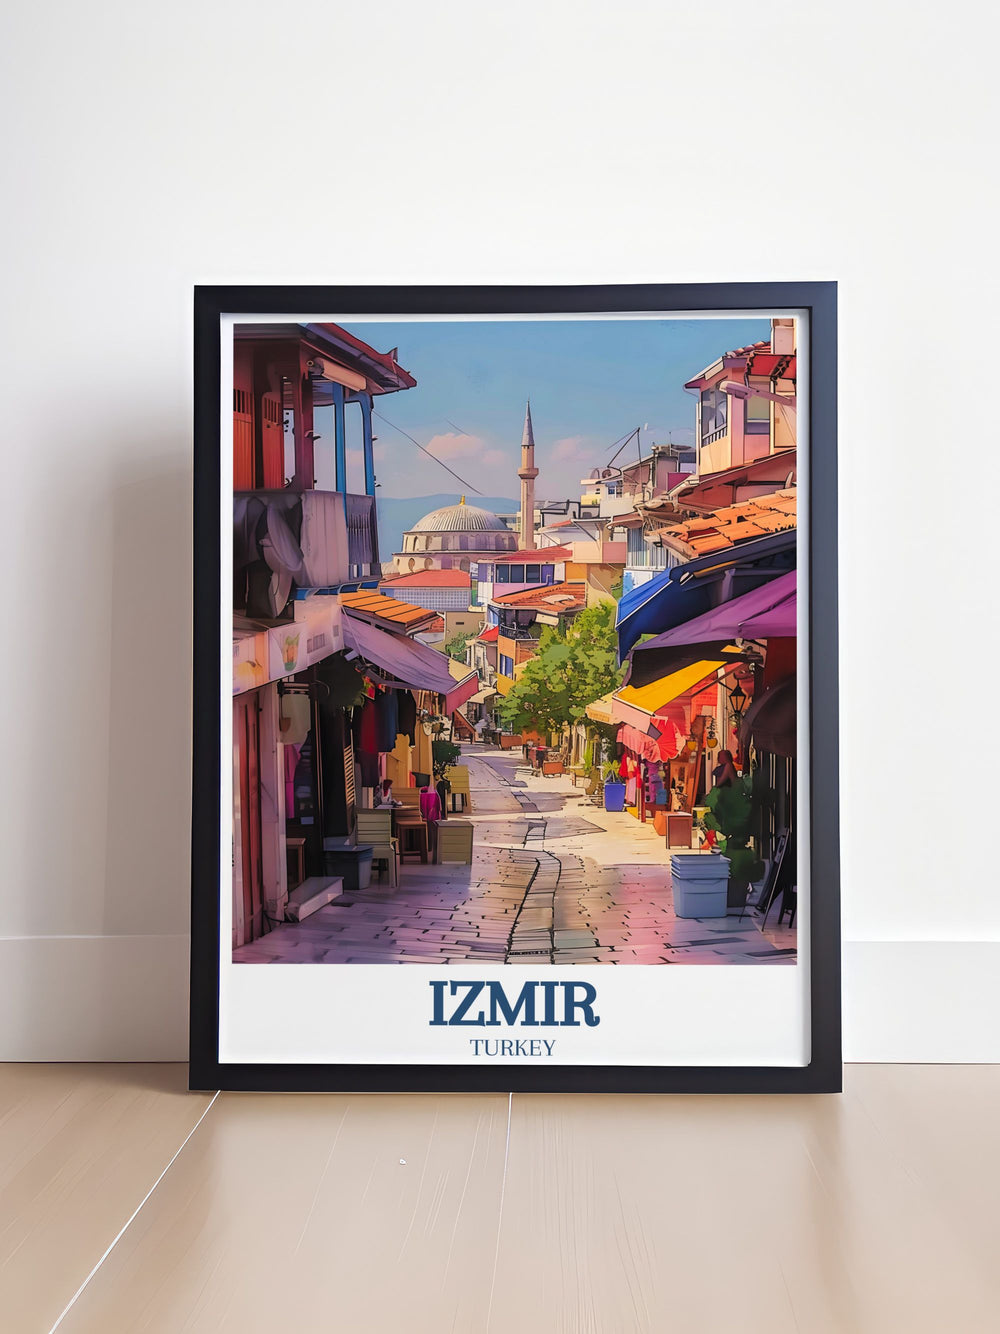 The dynamic energy of Kemeralti Bazaar and the architectural beauty of Başdurak Mosque are showcased in this detailed art print, perfect for adding a touch of Izmirs charm to your home decor.